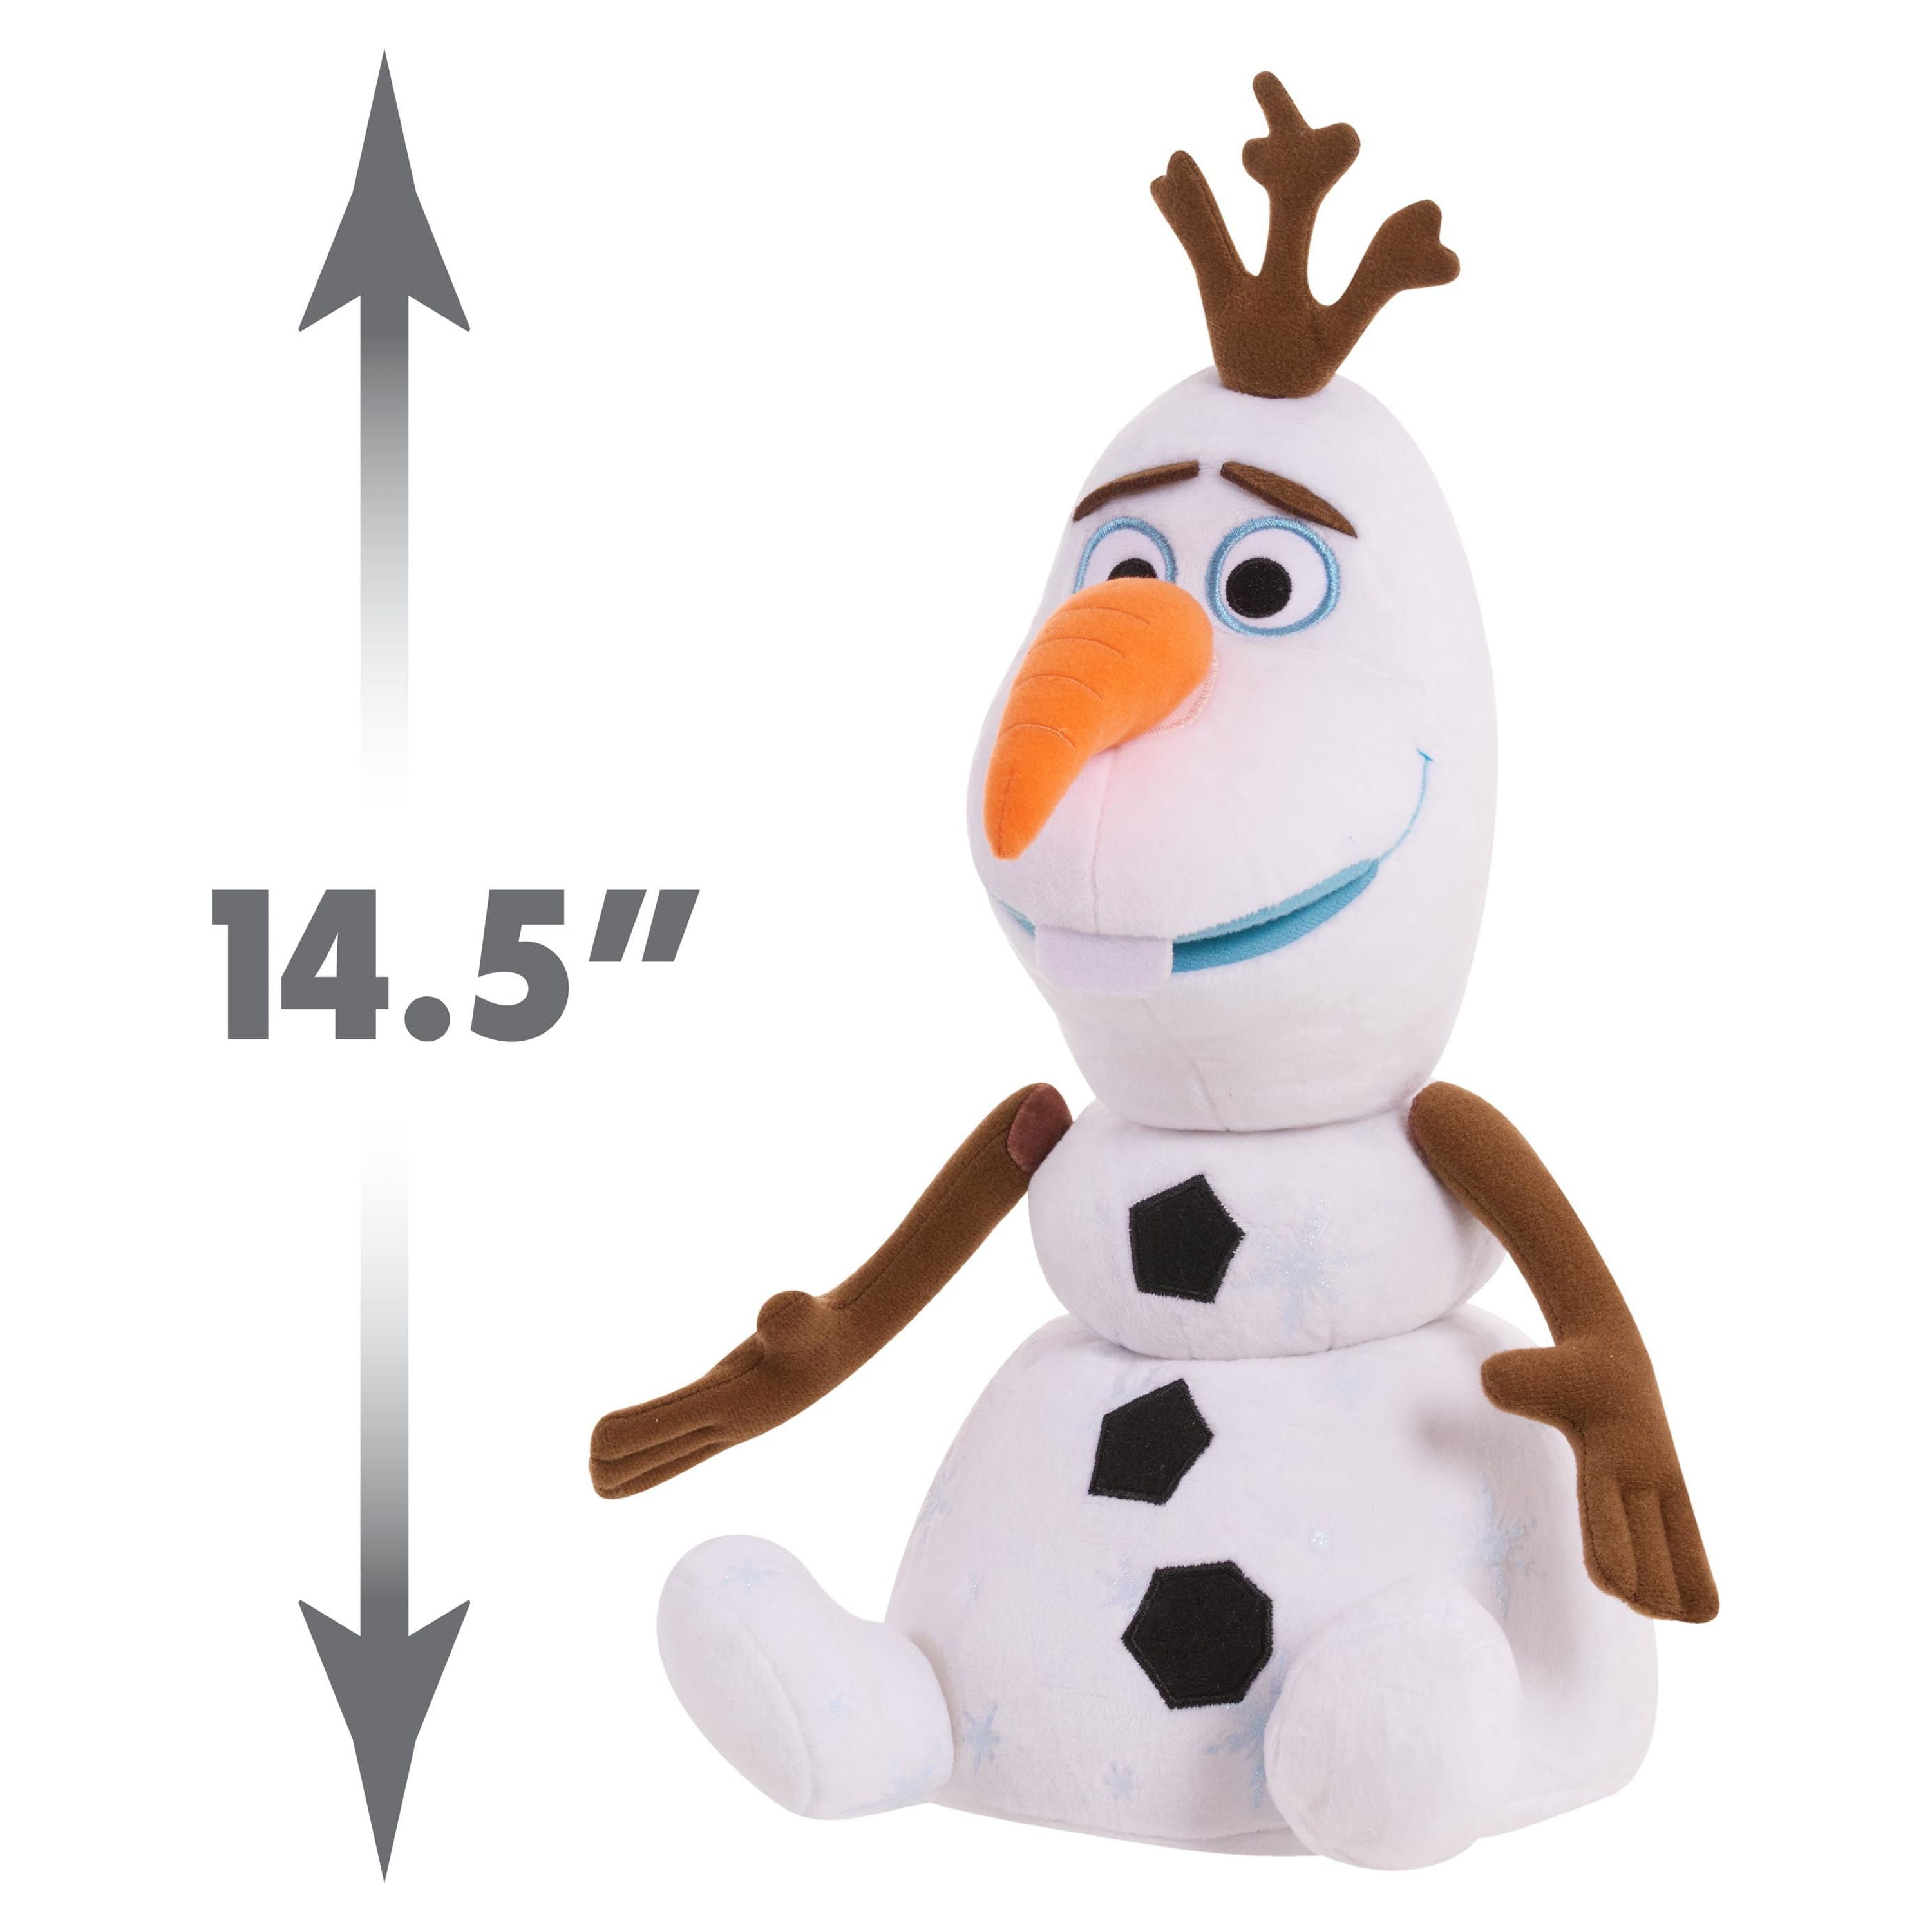 for Presents Ages Officially 3 Toys Shifter Shape Up, Frozen Plush, and Olaf Kids Licensed Disney\'s 2 Gifts